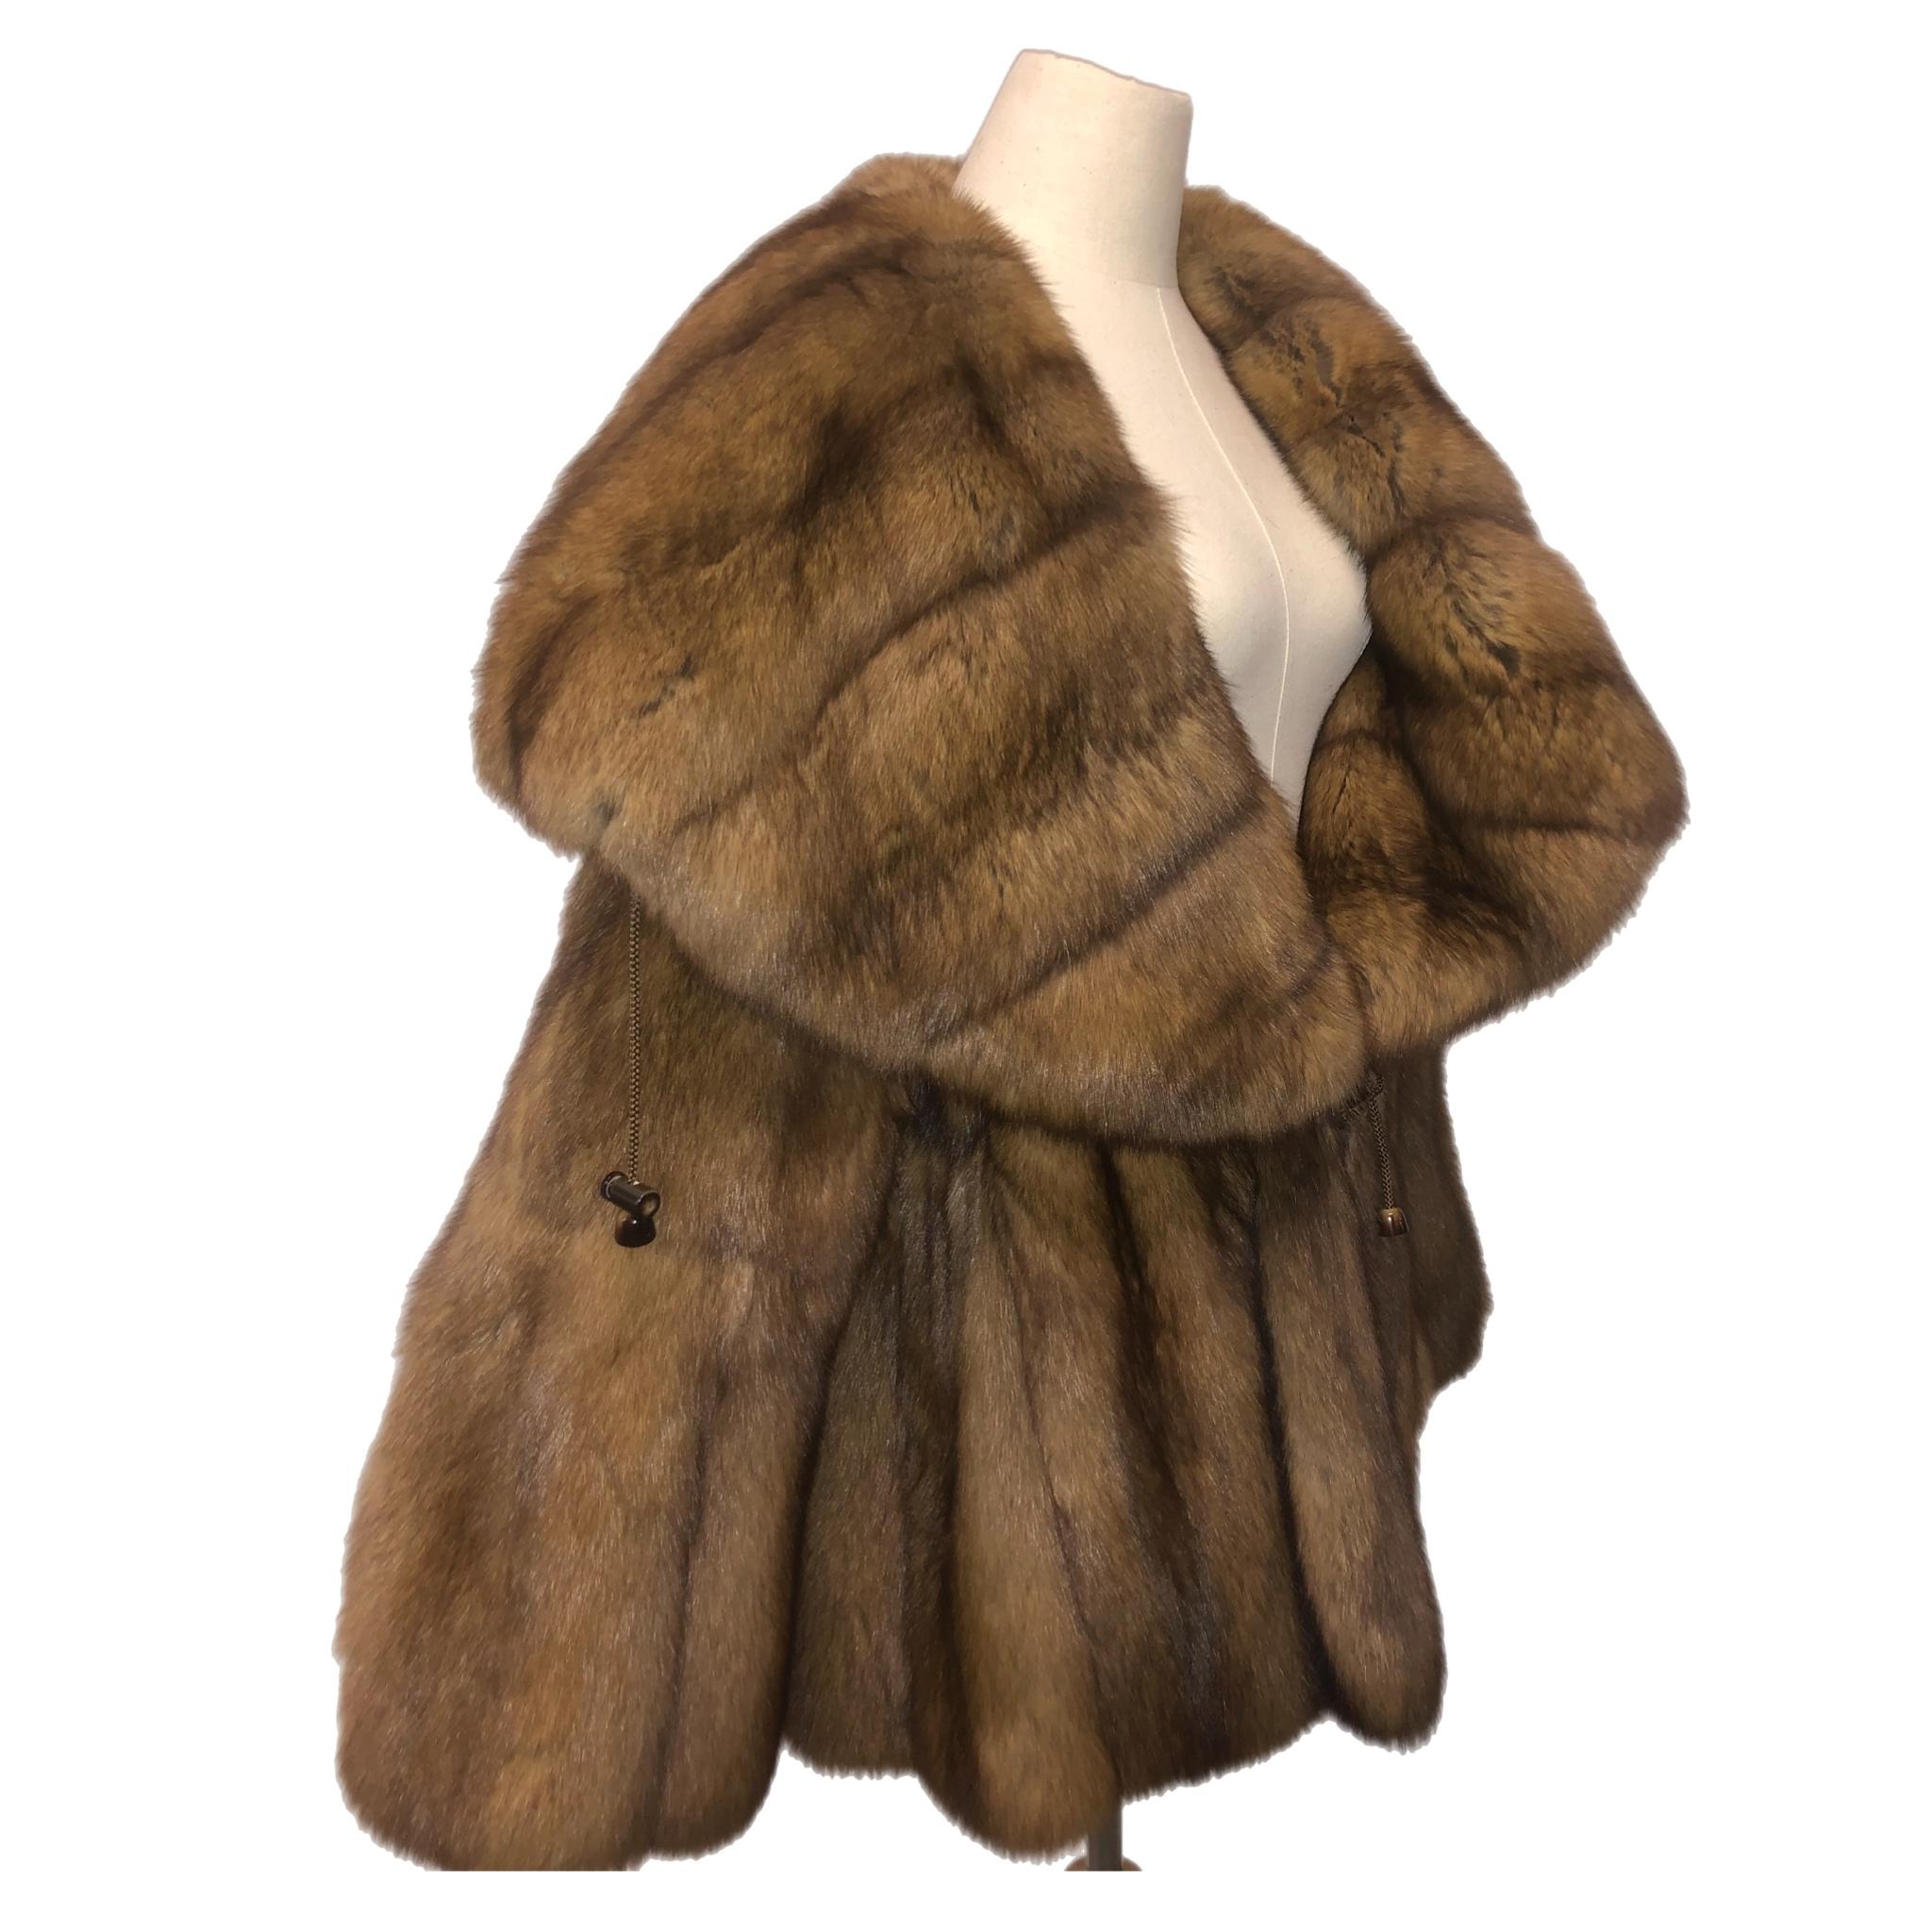 PRODUCT DESCRIPTION: 
Brand new Bisang sobol Russian Sable fur coat size 14-18
This beautiful rare find is made of full skins fluffy Russian sable fur, always kept in frozen vault, pristine condition never worn with tags the lining is brand new, the